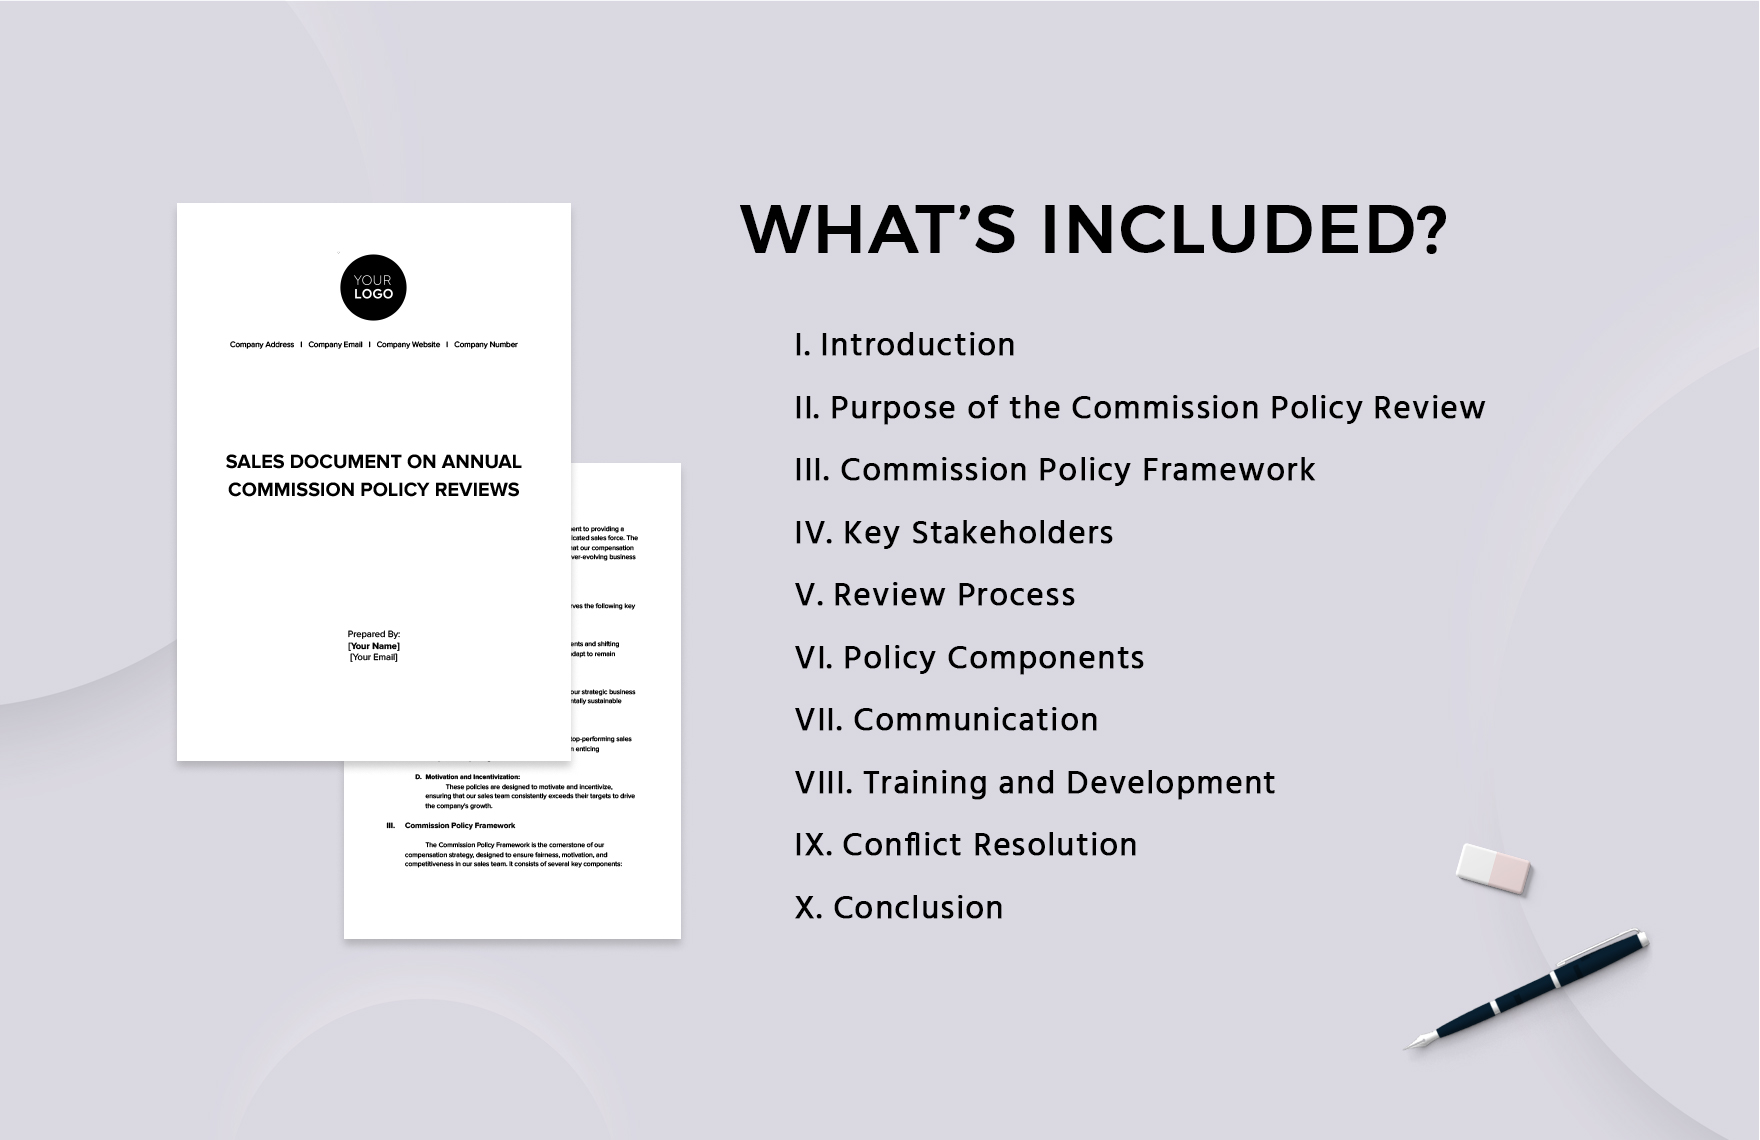 Sales Document on Annual Commission Policy Reviews Template